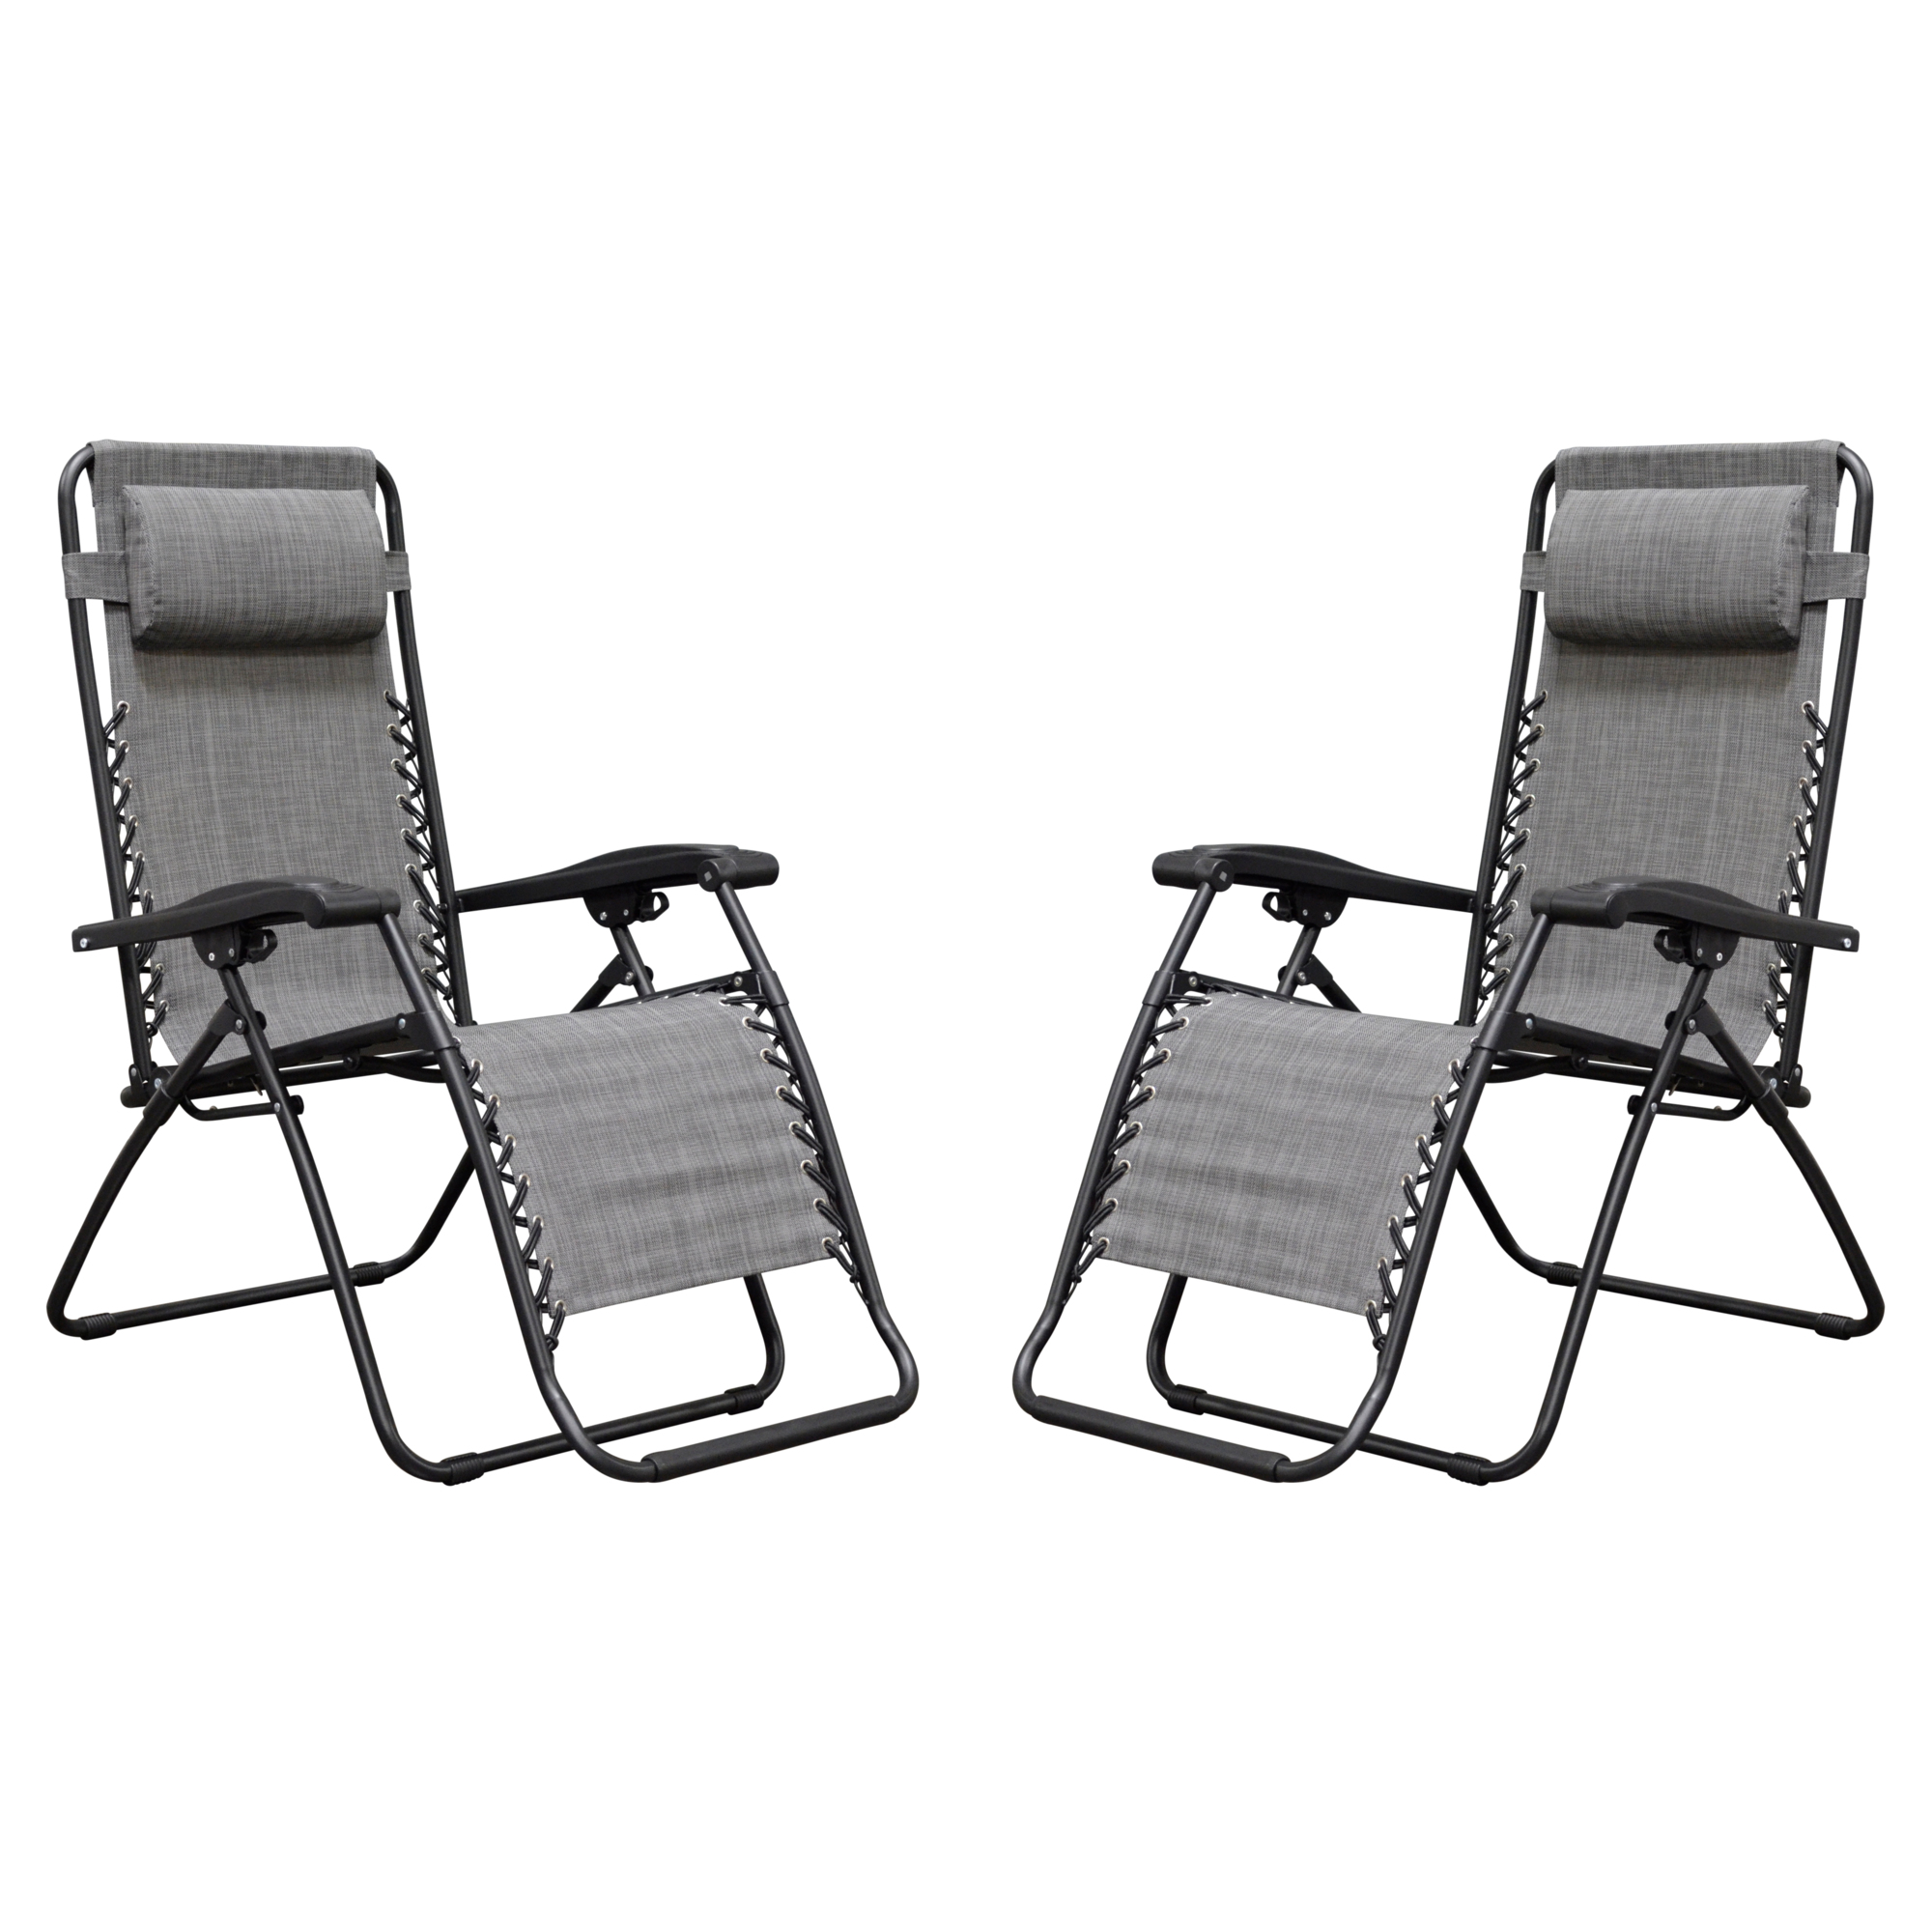 Caravan Canopy, Infinity Zero Gravity Chair Lounger 2 Pack, Primary Color Gray, Material Textile, Width 27.16 in, Model 80009000122